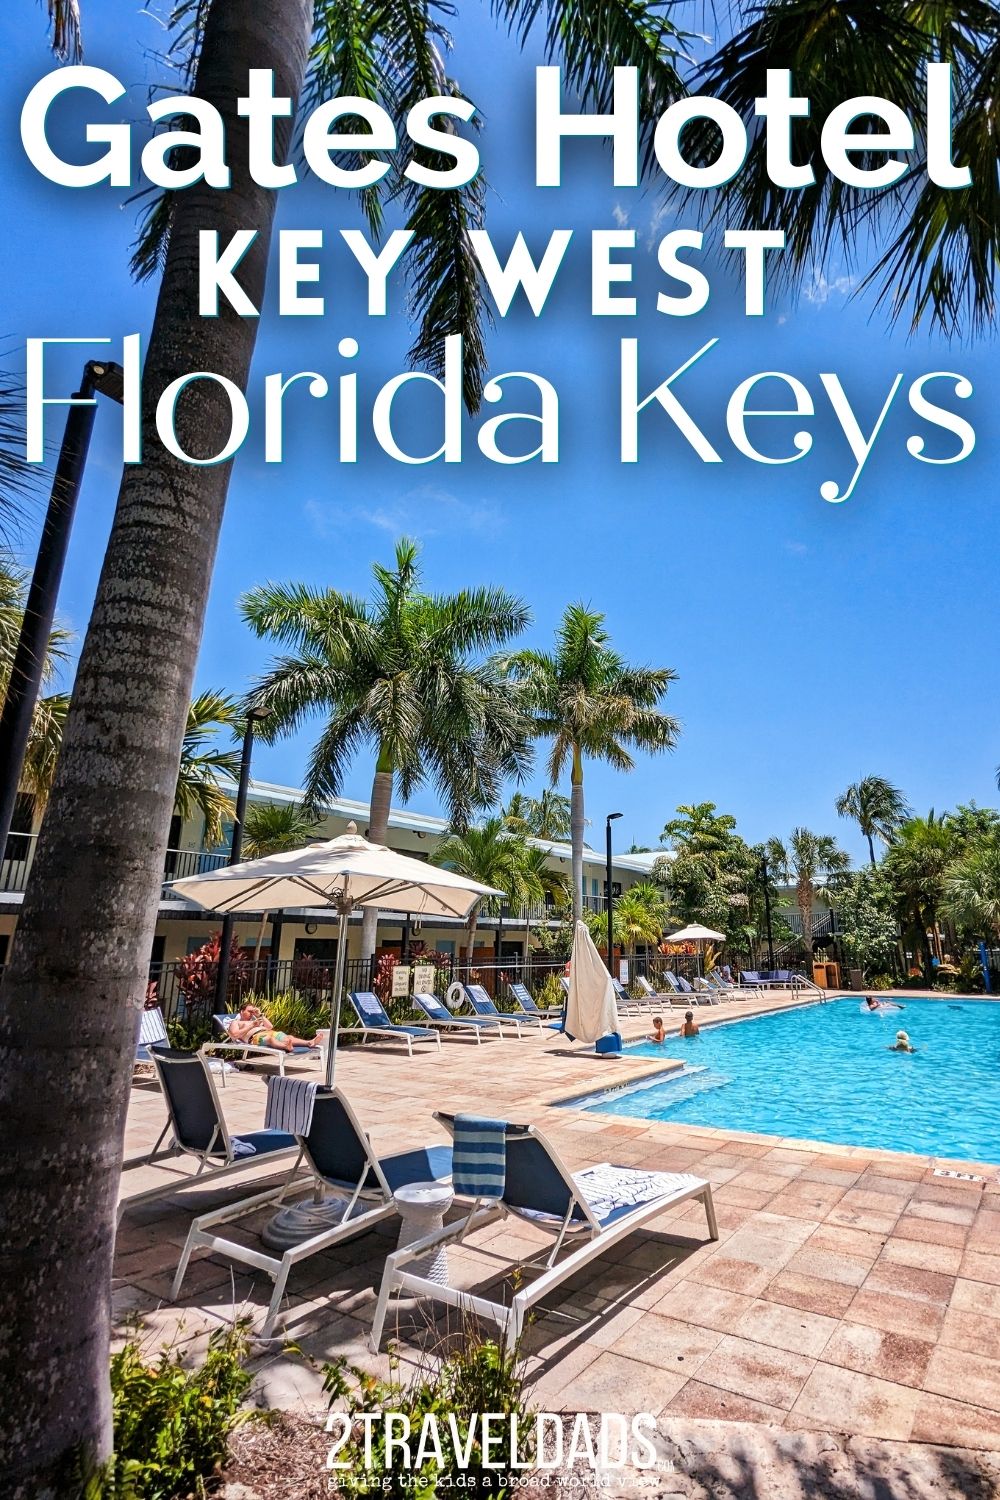 The Gates Hotel Key West is a great option for a budget visit to the Florida Keys. From the large pool to a free shuttle to downtown Key West see why we like the Gates Hotel for a family vacation.